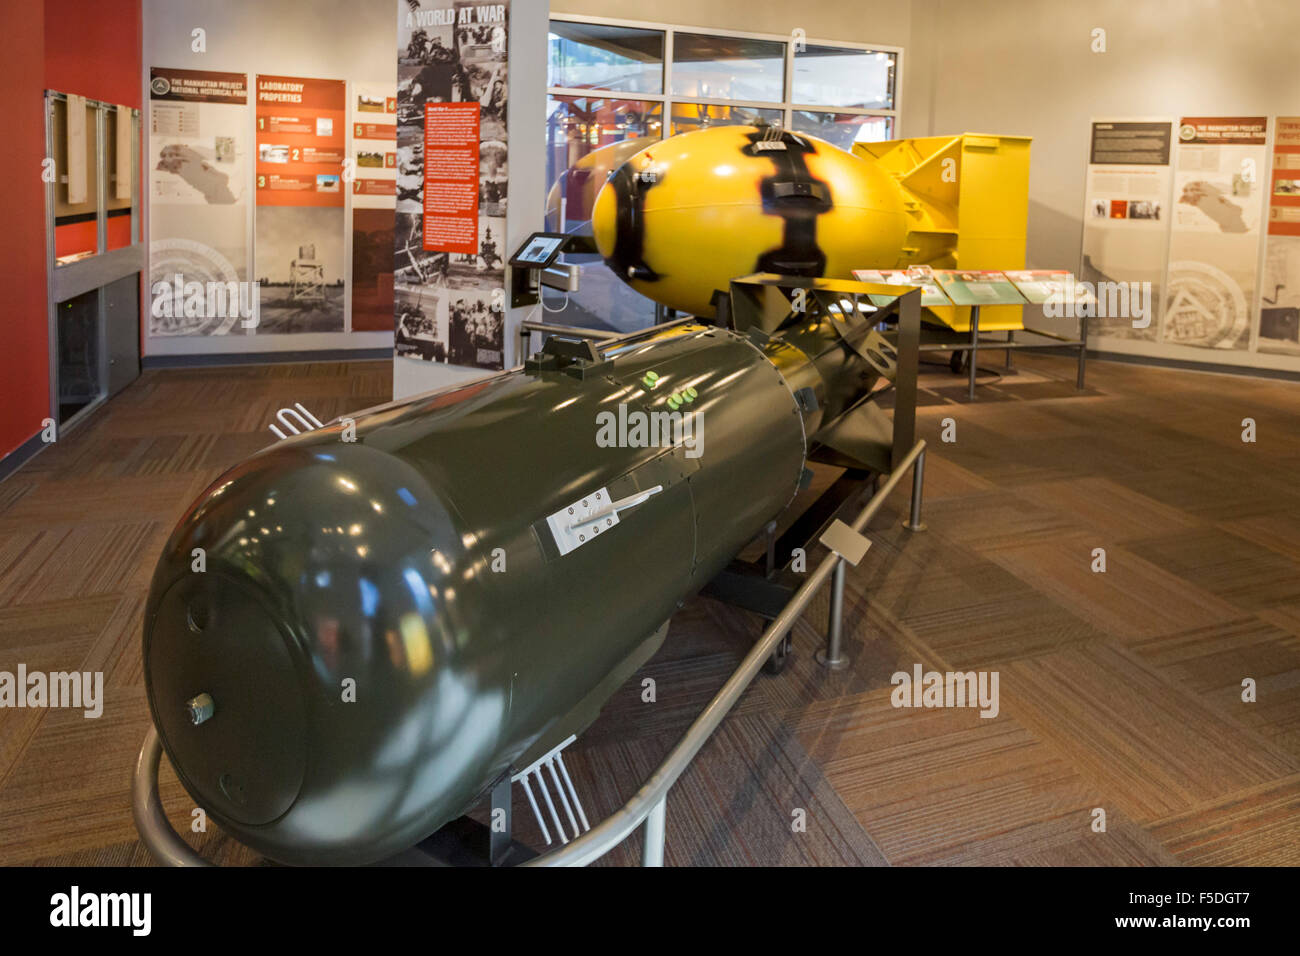 Los Alamos, New Mexico - The Bradbury Science Museum contains replicas of the nuclear weapons that were dropped on Japan. Stock Photo